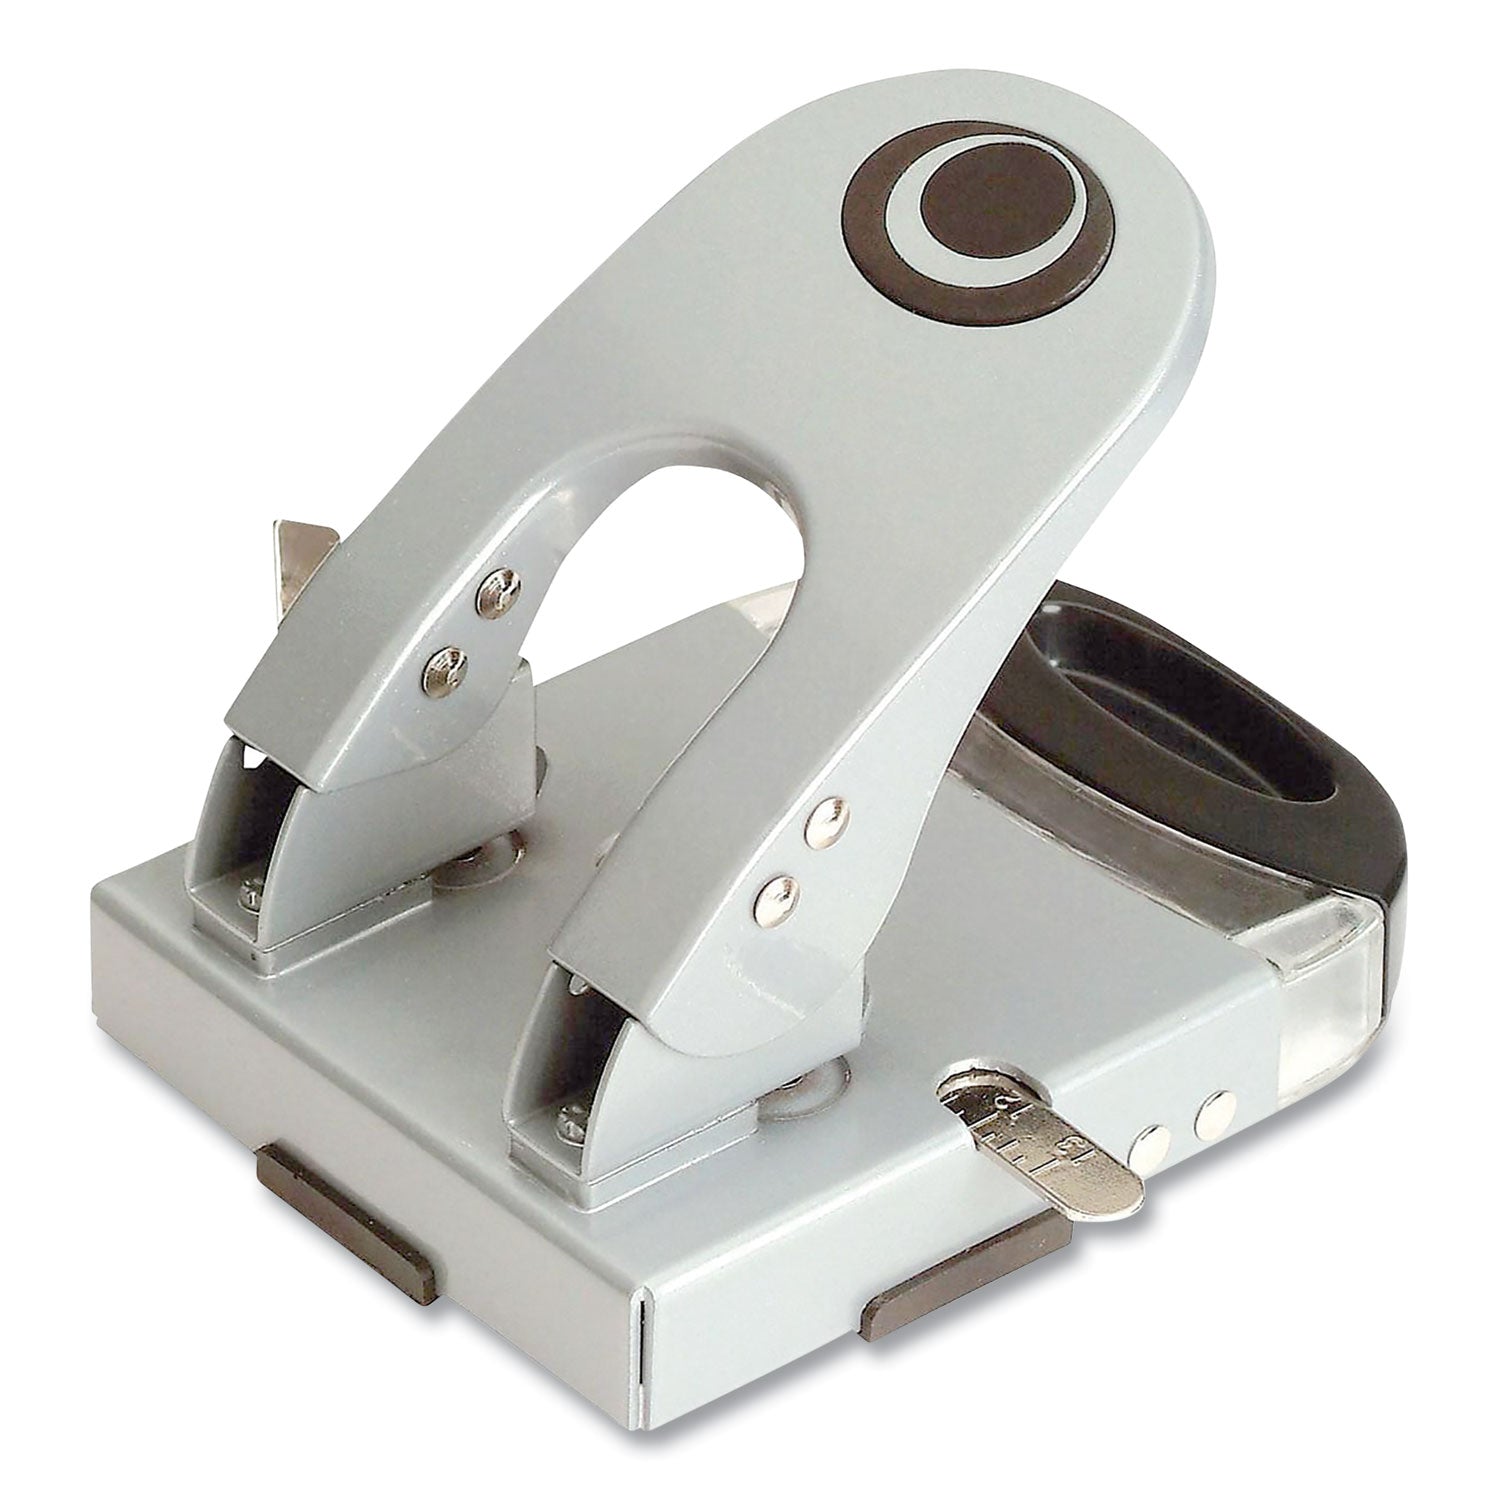 50-sheet-deluxe-two-hole-punch-1-4-holes-gray-blue_oic90101 - 1